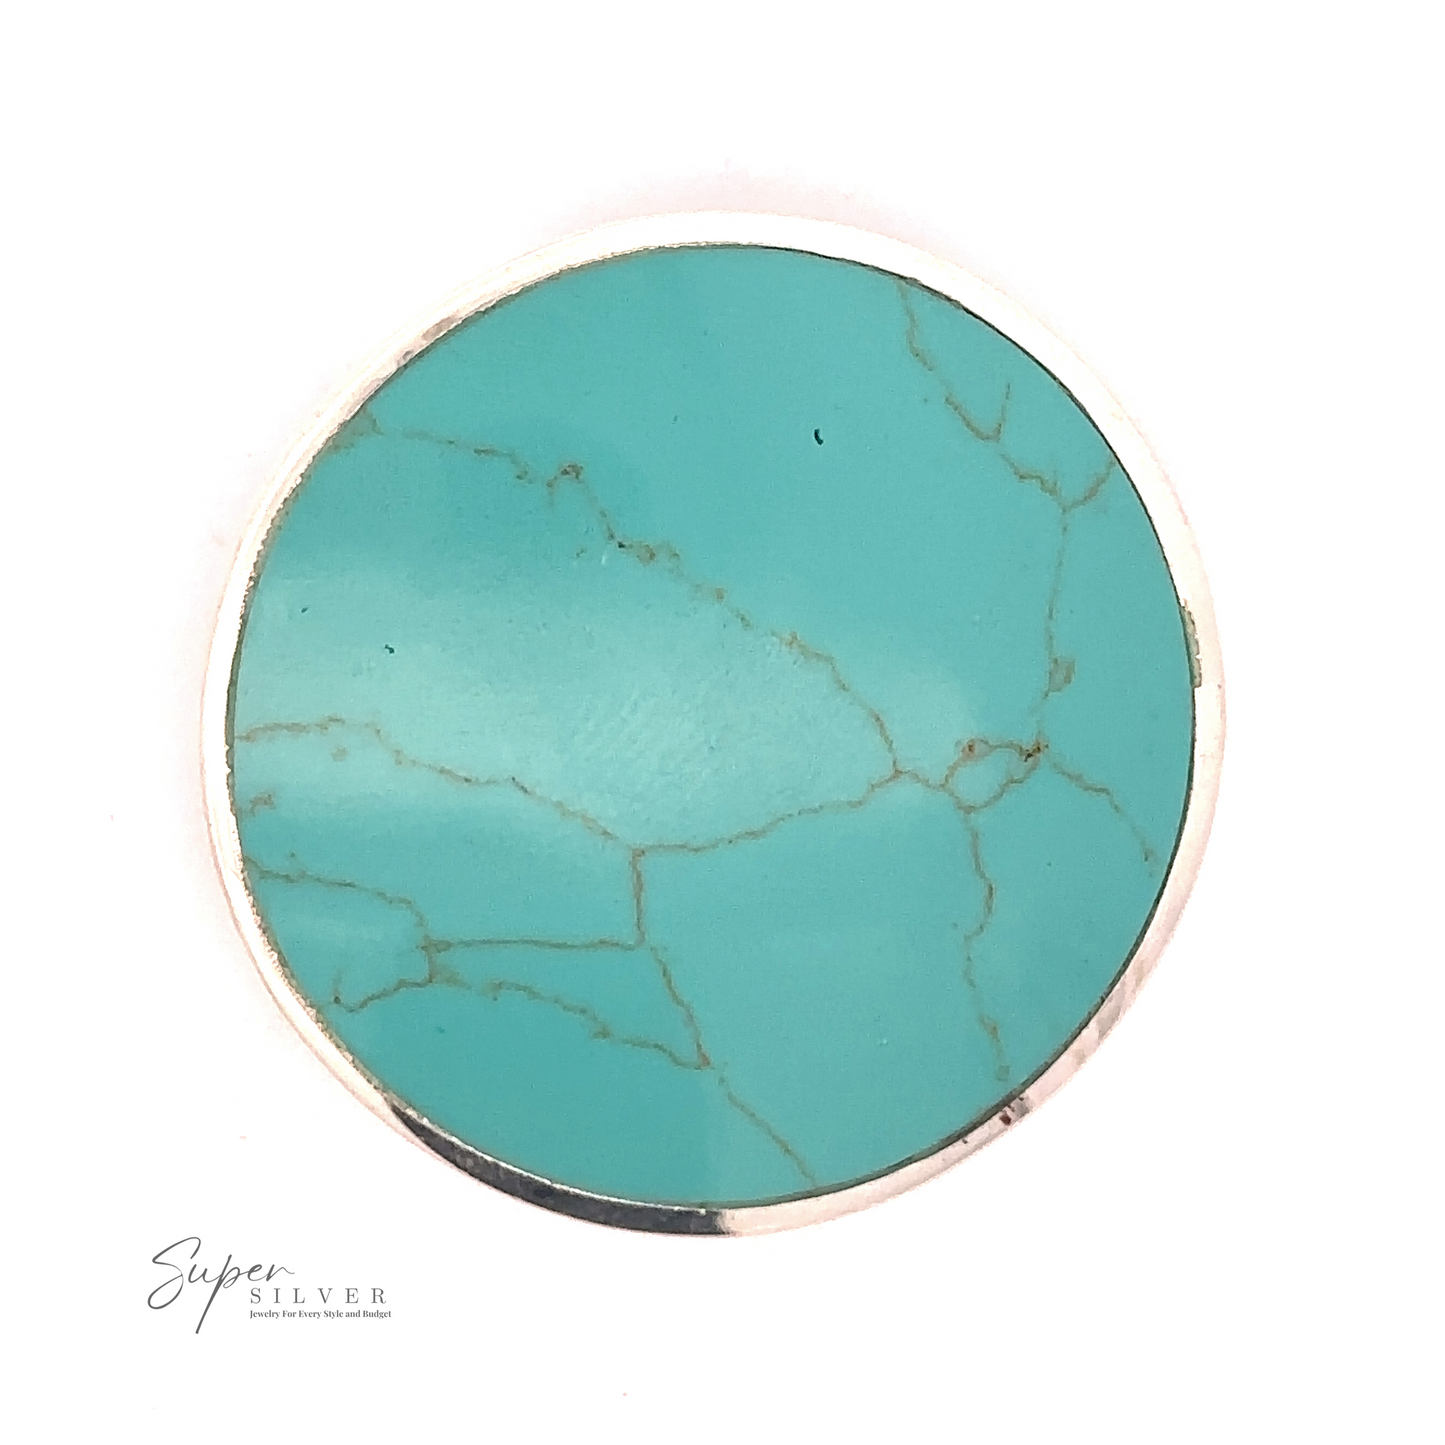 
                  
                    A round turquoise stone with natural veins, bordered by a thin silver rim. The Large Round Turquoise Pendant boasts the "Super Silver" logo in the bottom left corner.
                  
                